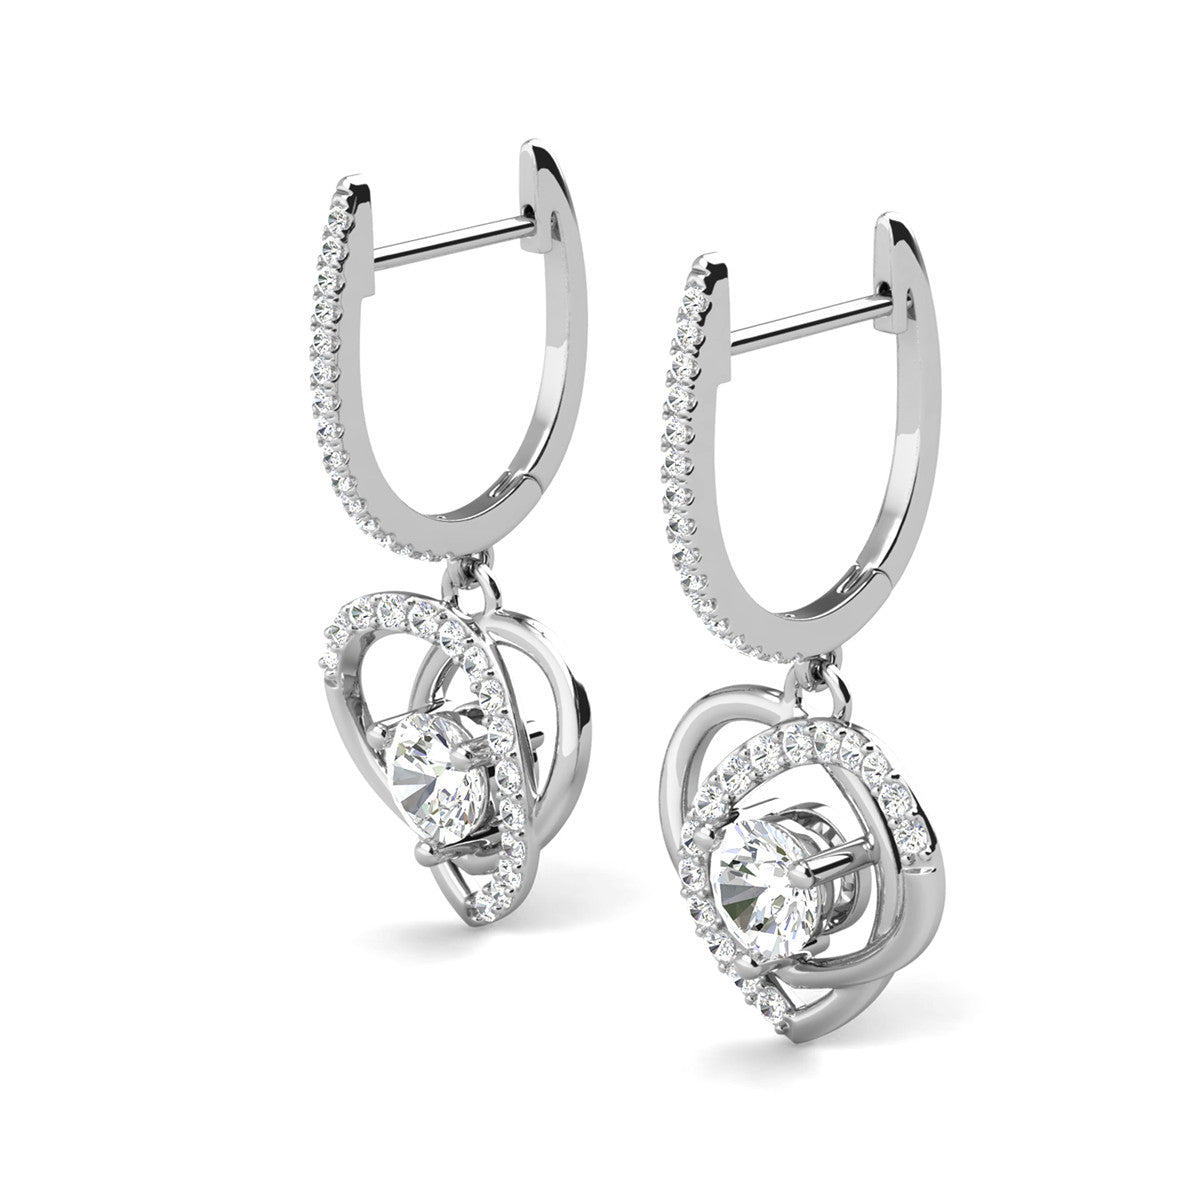 Moissanite by Cate & Chloe Naomi Sterling Silver Drop Earrings with Moissanite Crystals